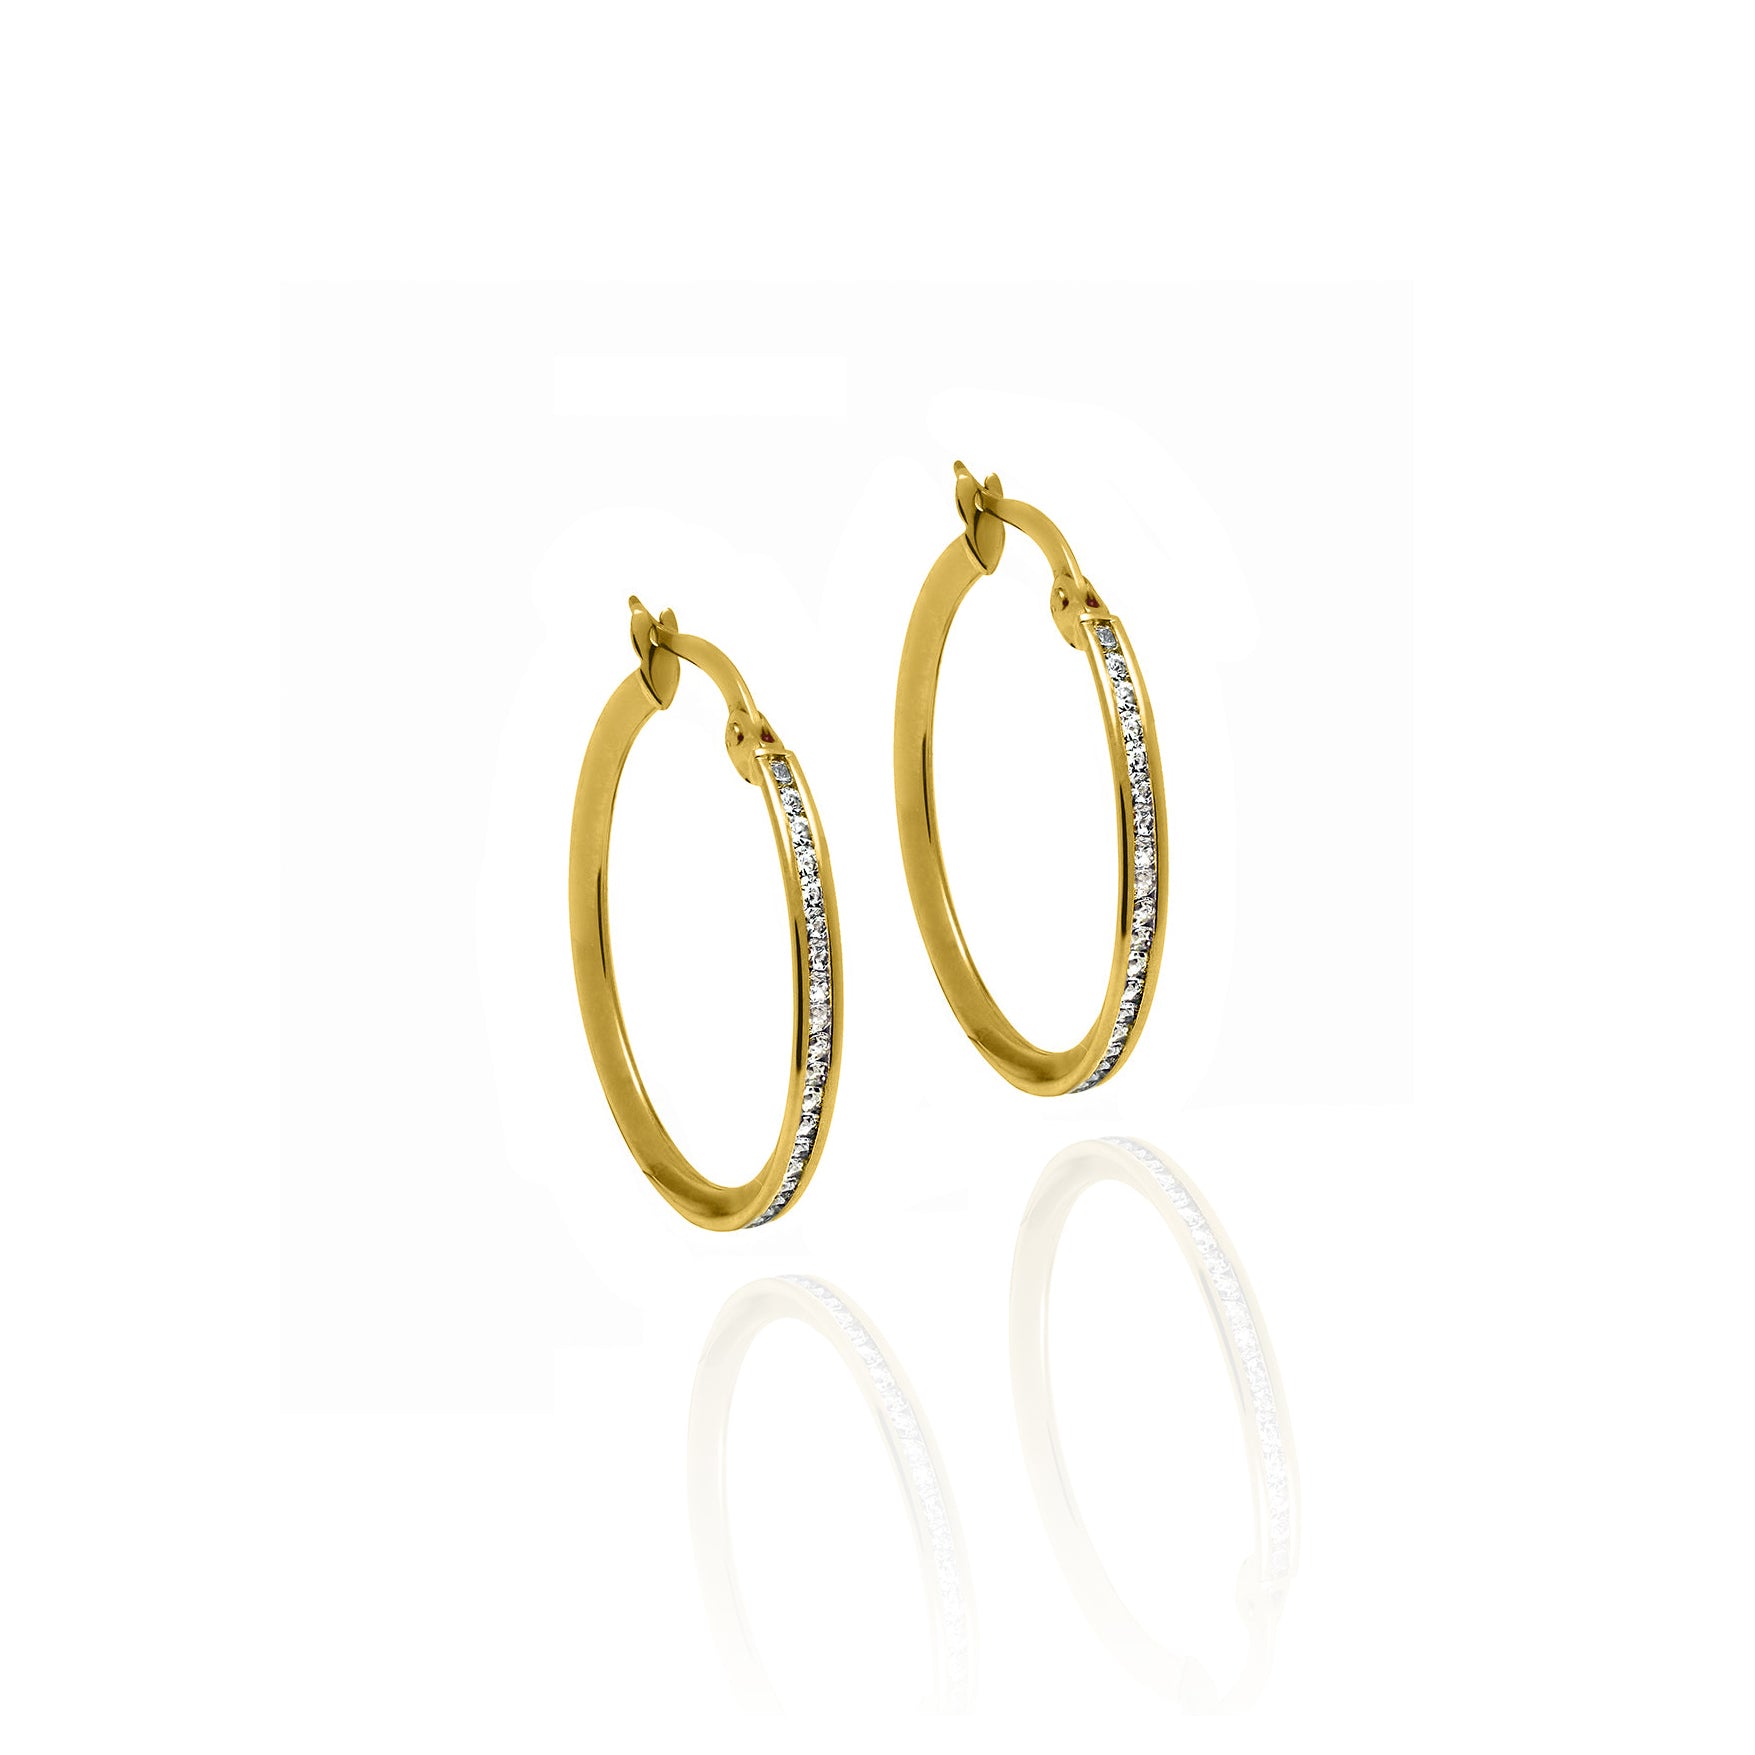 Medium Crystal Hoops 2mm Width Solid Gold with Cubic Zirconia Yellow